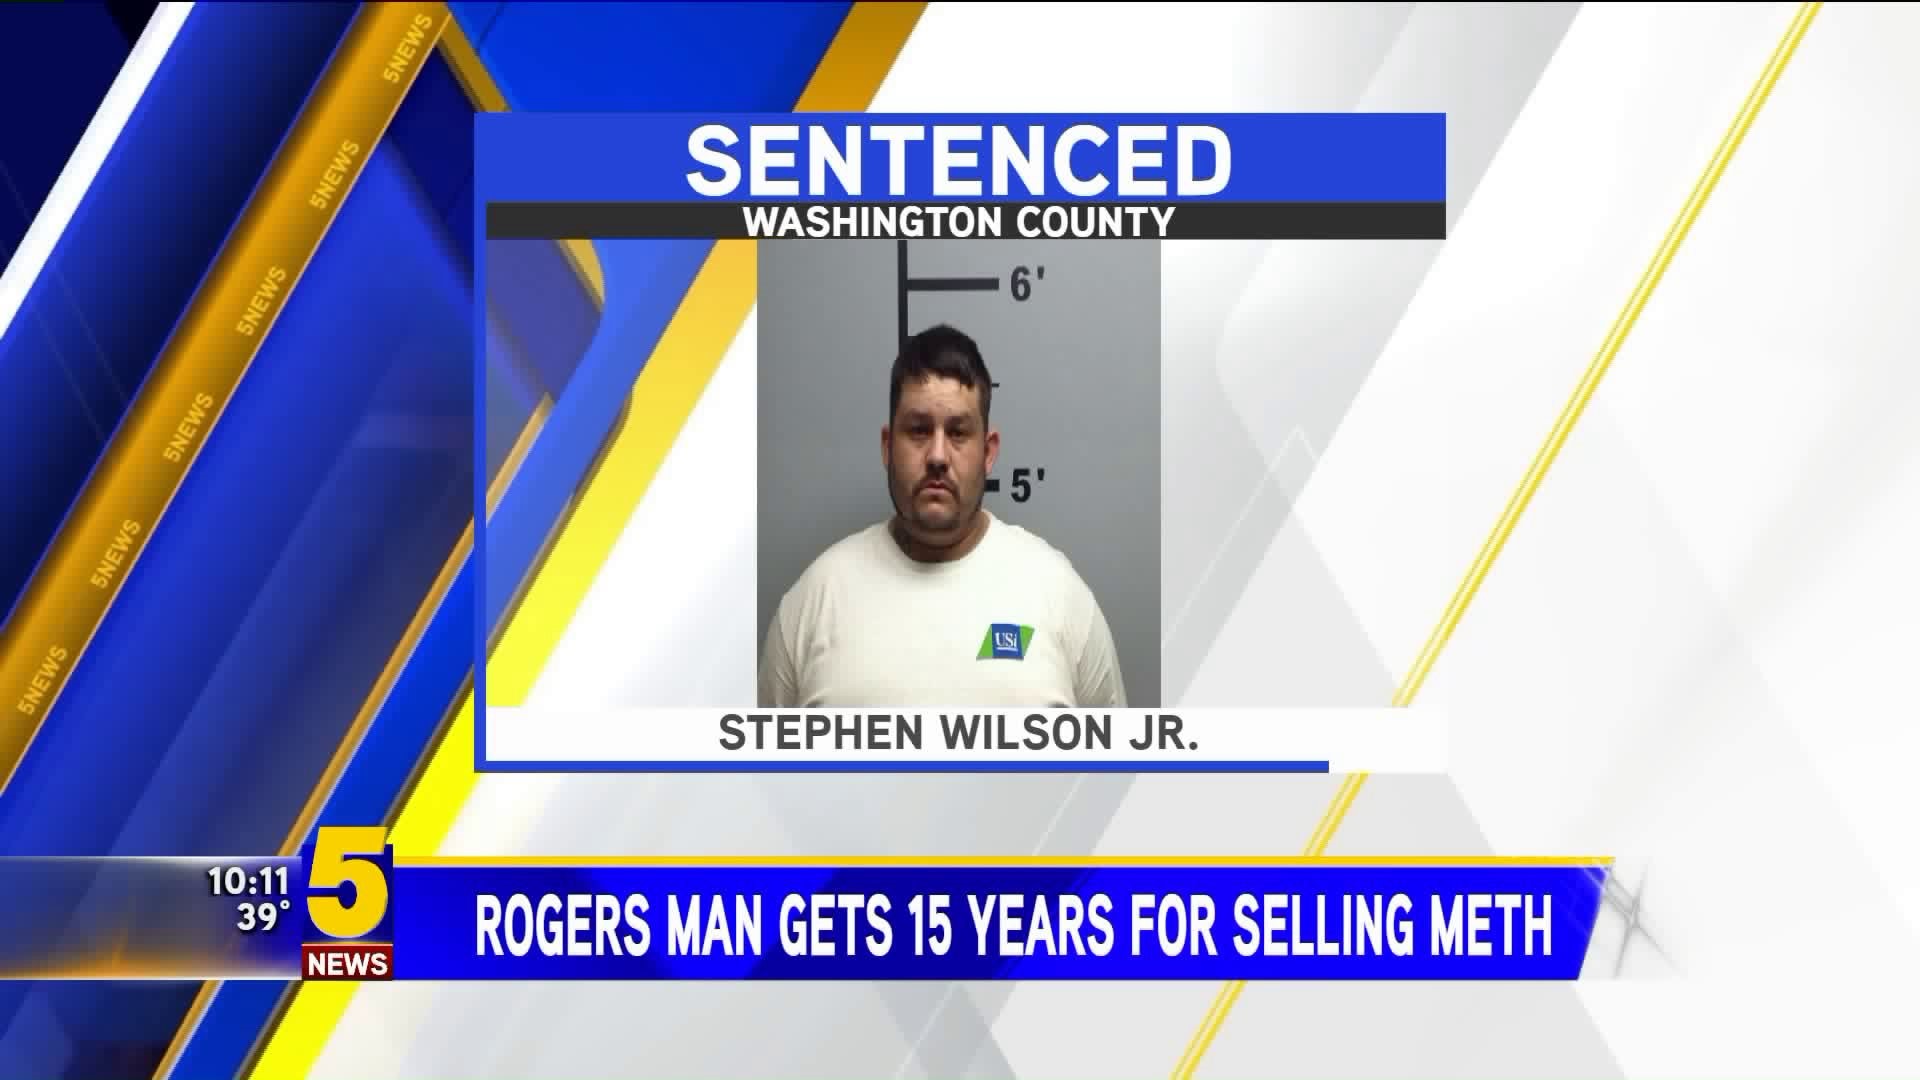 Rogers man gets 15 year for selling meth